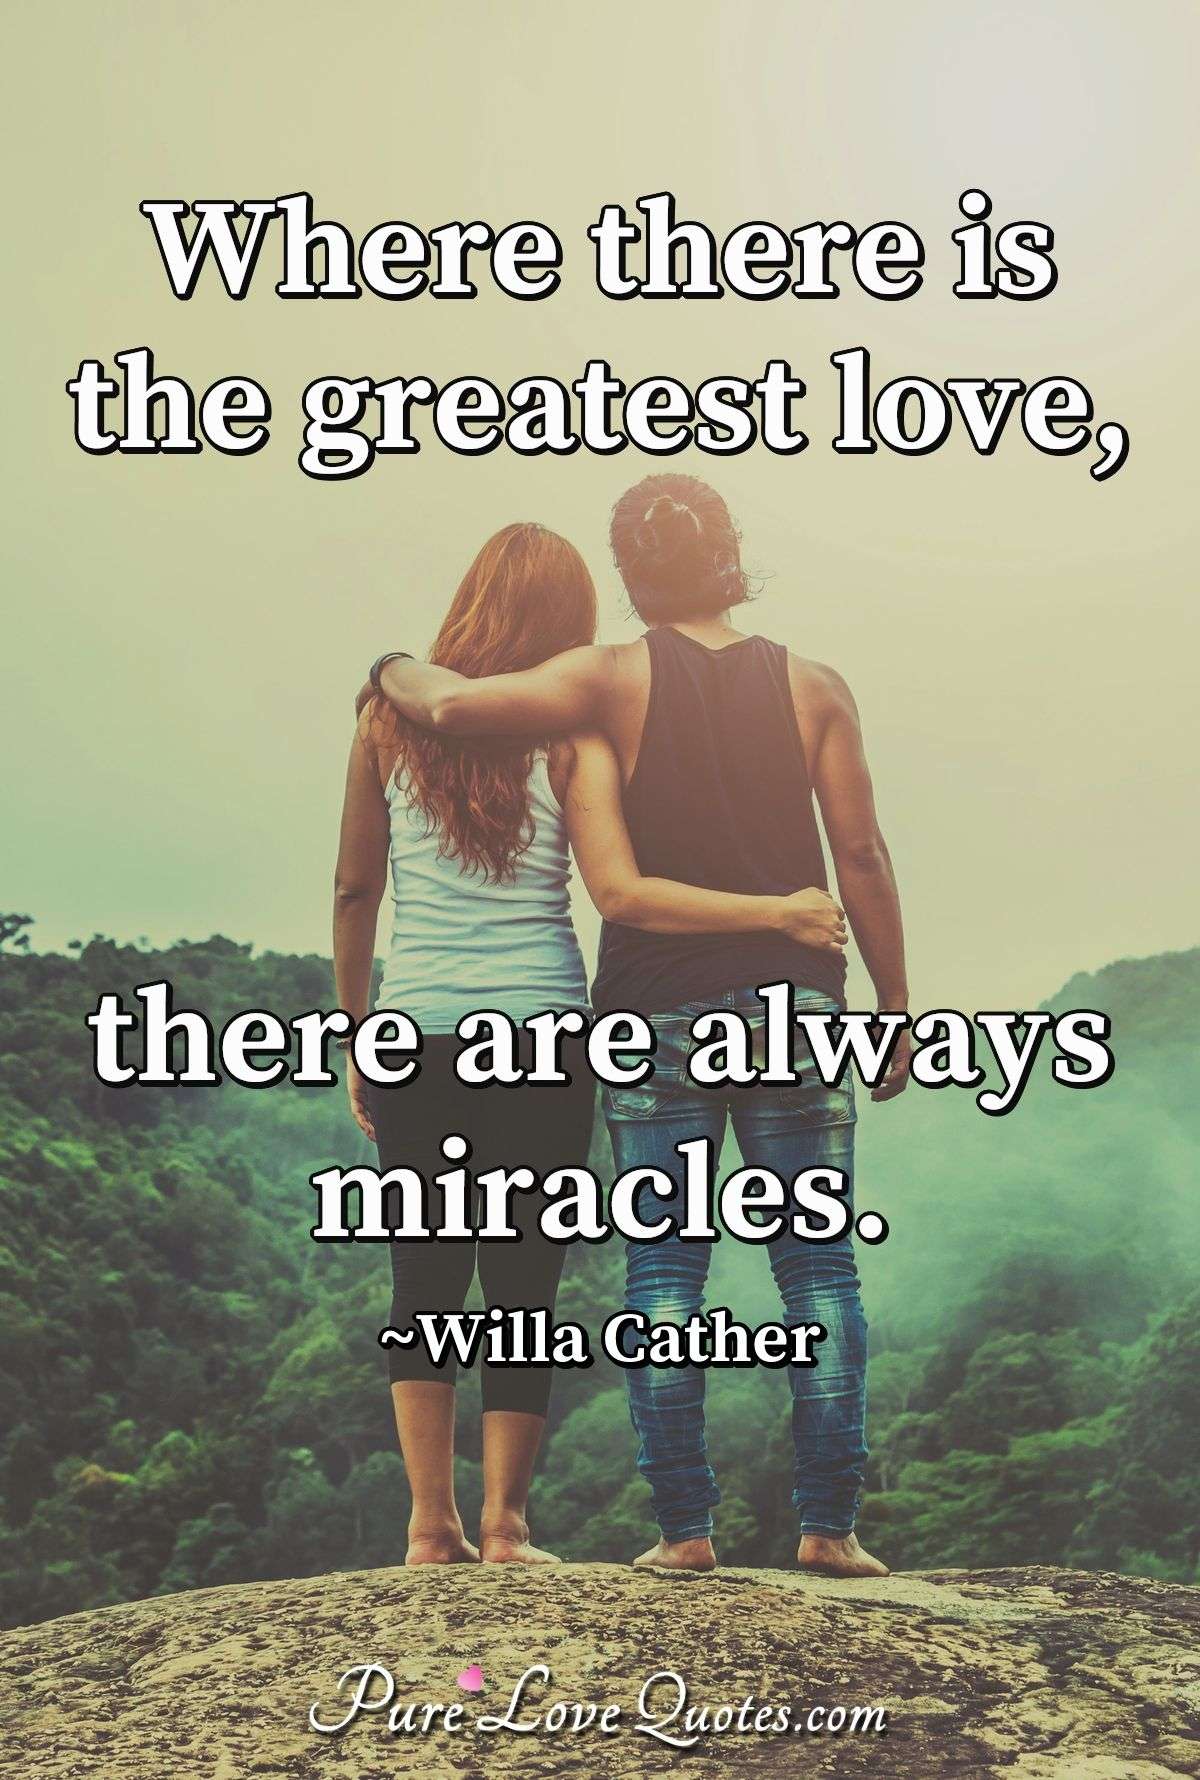 Where there is the greatest love, there are always miracles. - Willa Cather